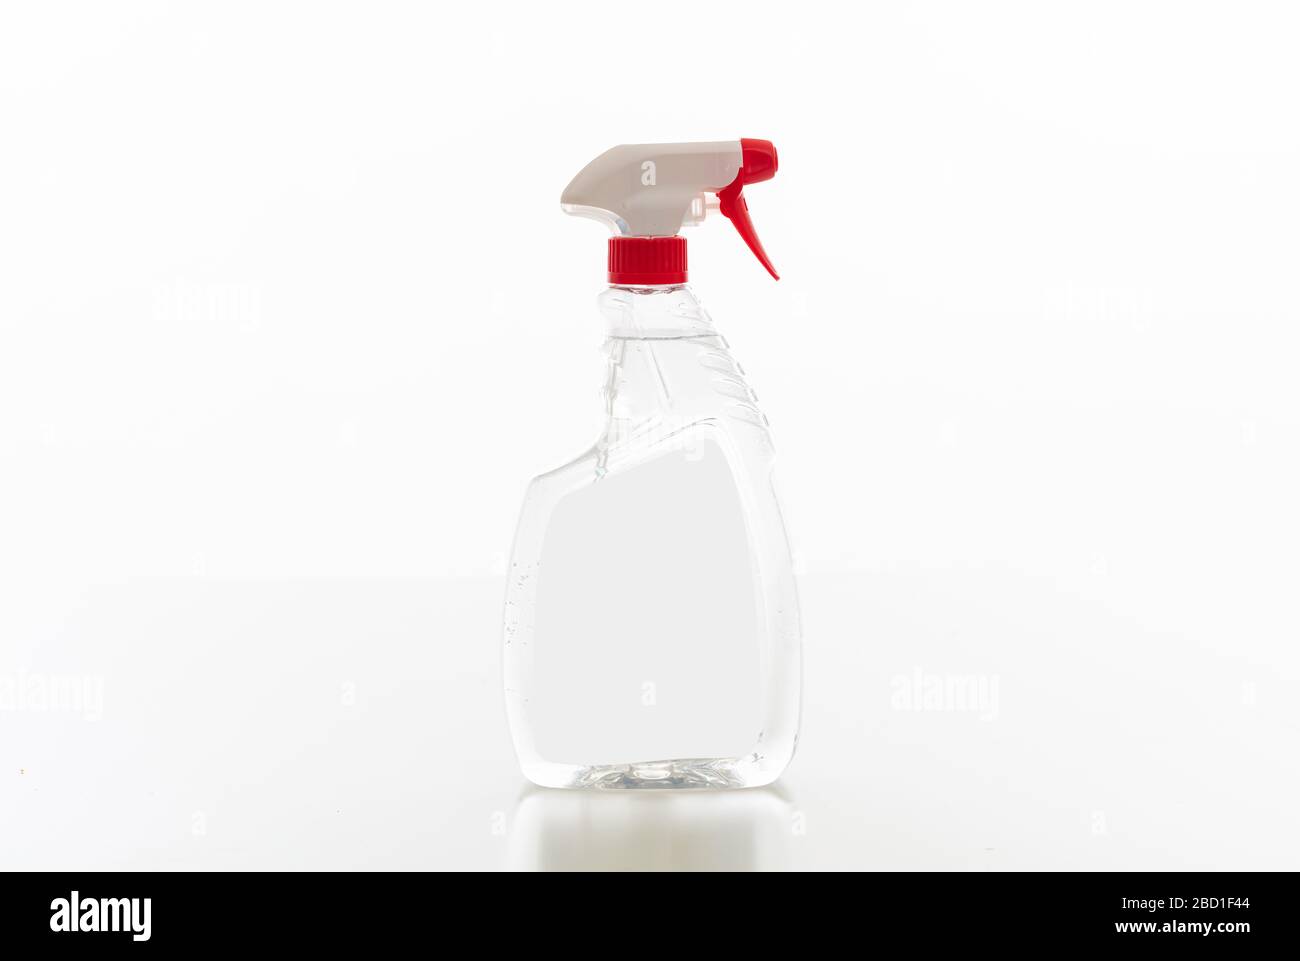 Cleaning spray bottle clear with red trigger isolated against white background. Chemical detergent product no name template, blank empty label, copy s Stock Photo